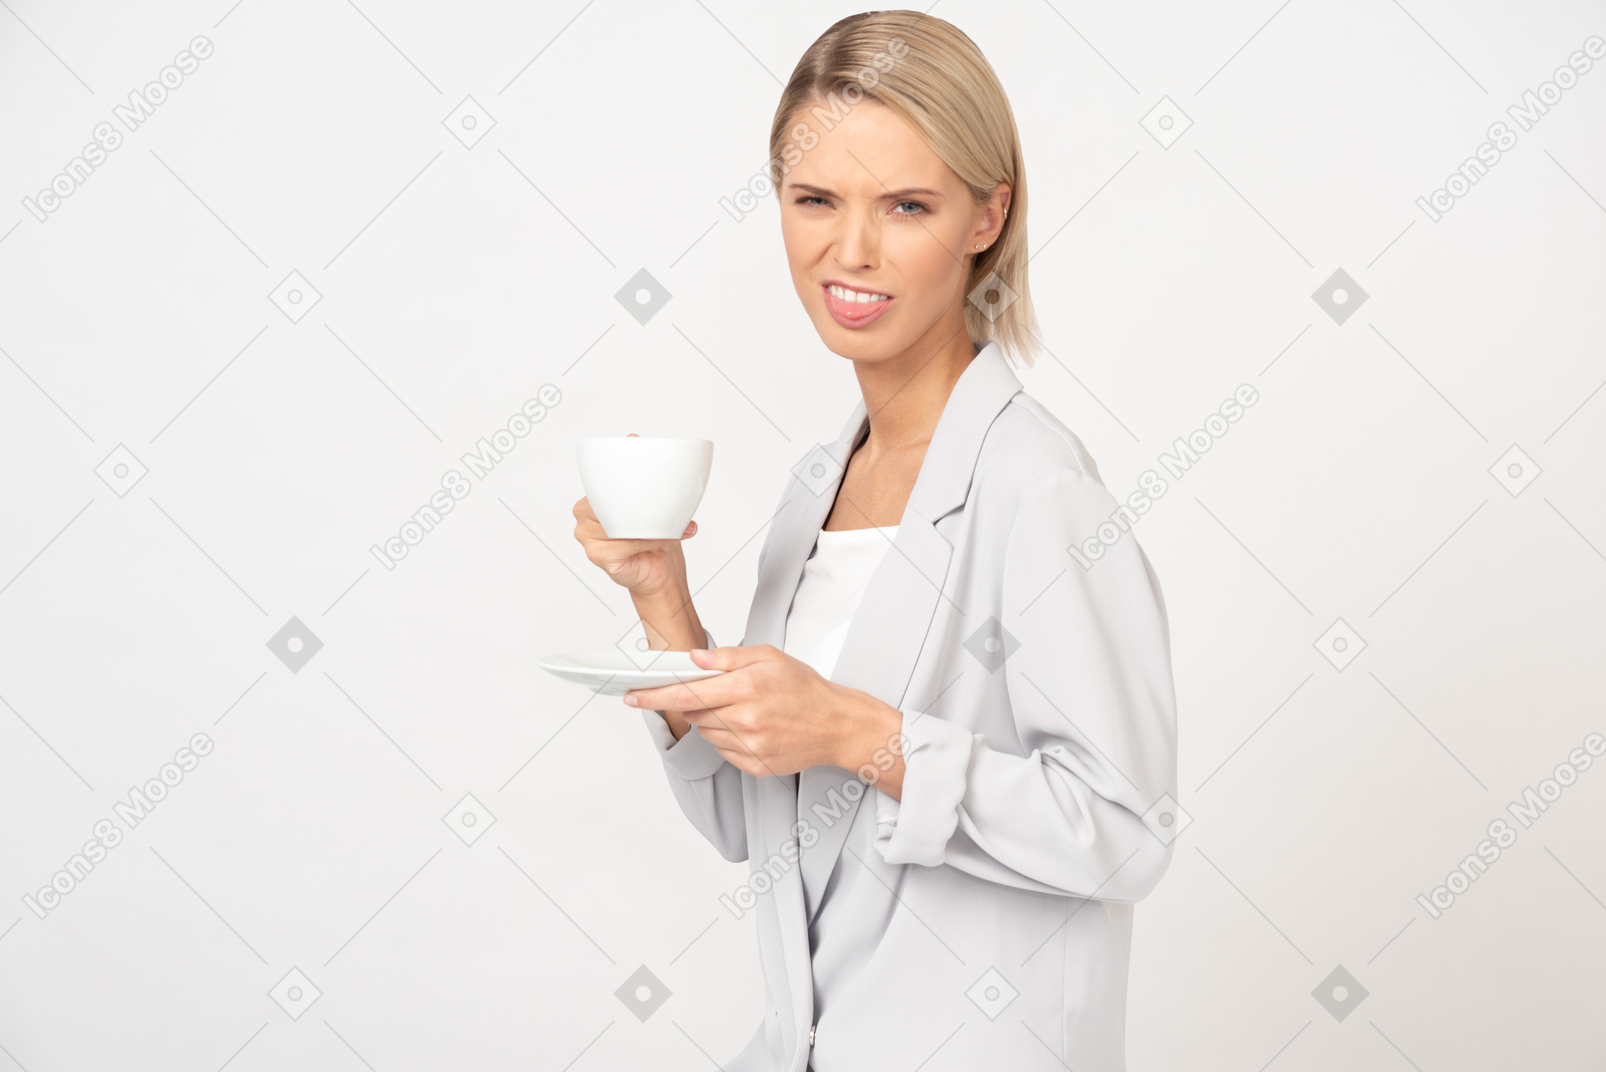 Disappointed with her coffee